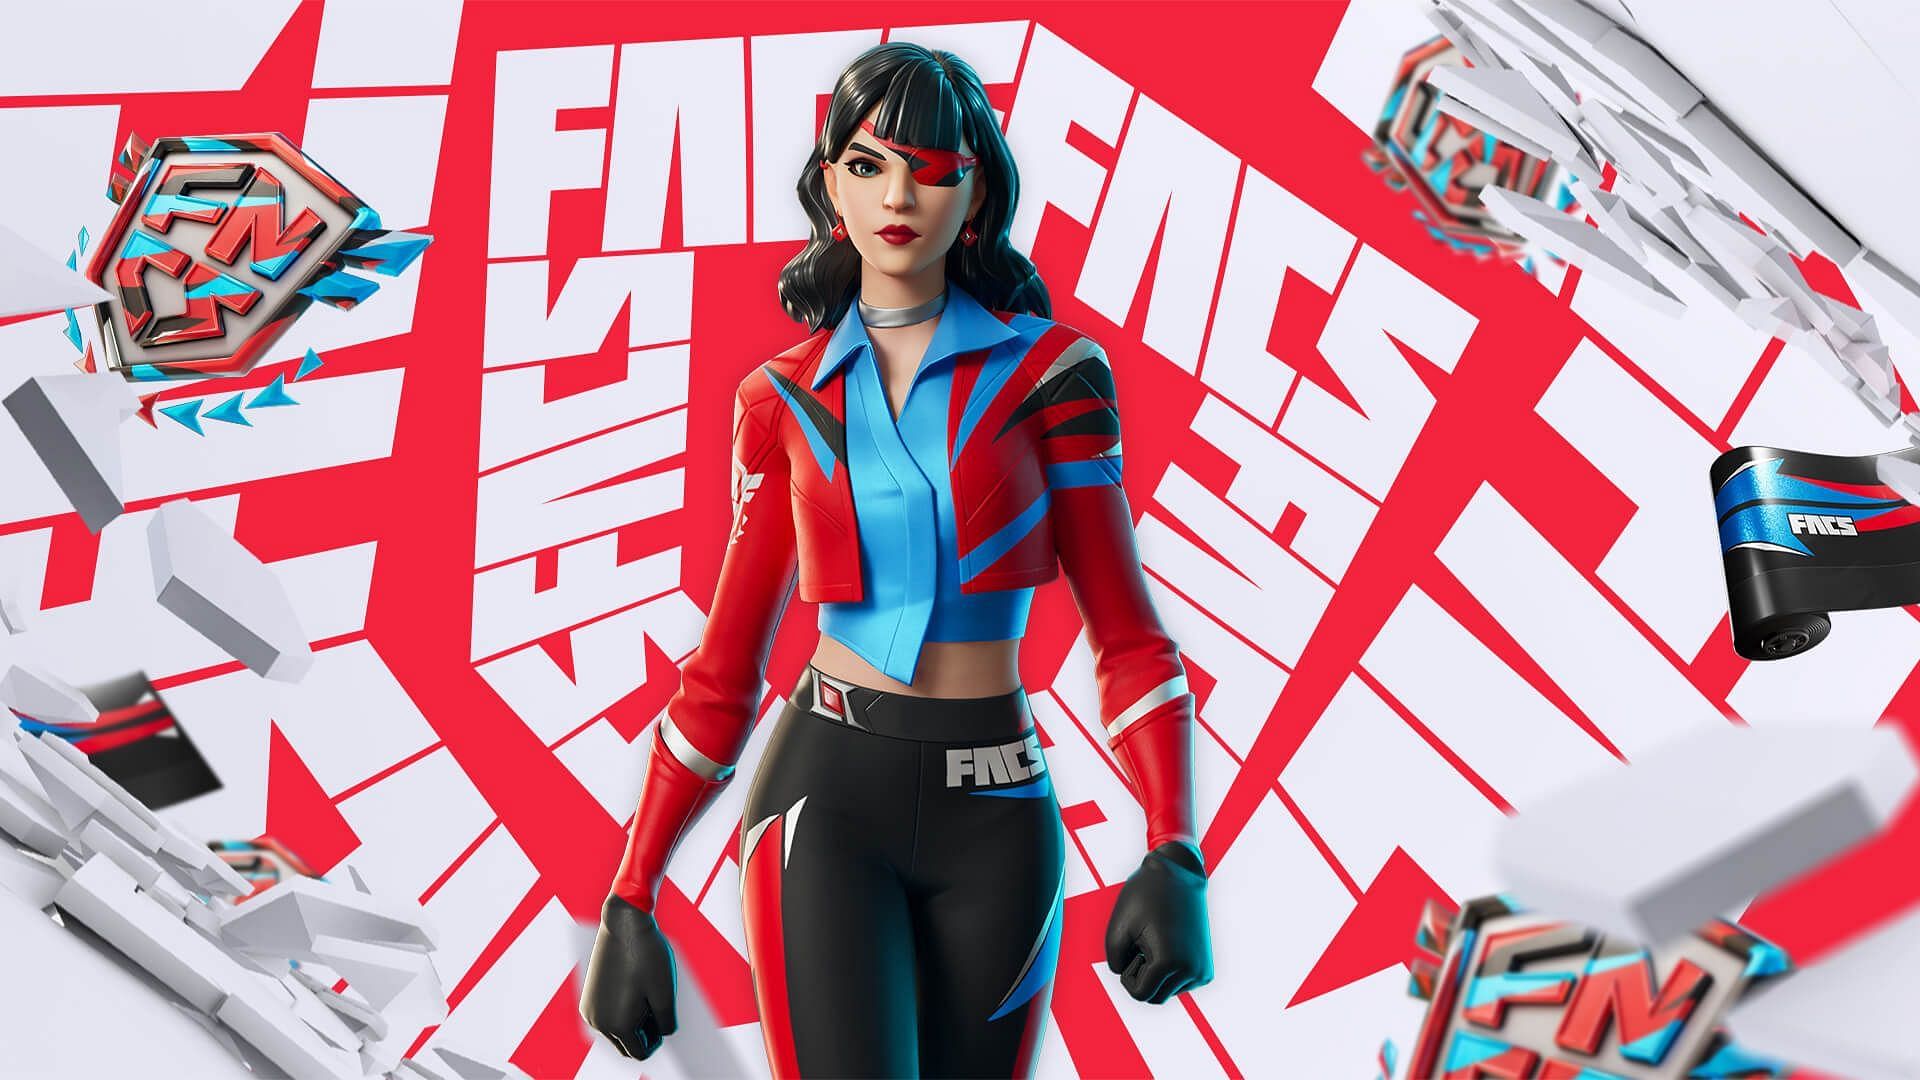 &quot;Who the hell thought this colour design was good&quot;: Fortnite community is divided on the FNCS Champion Siren outfit